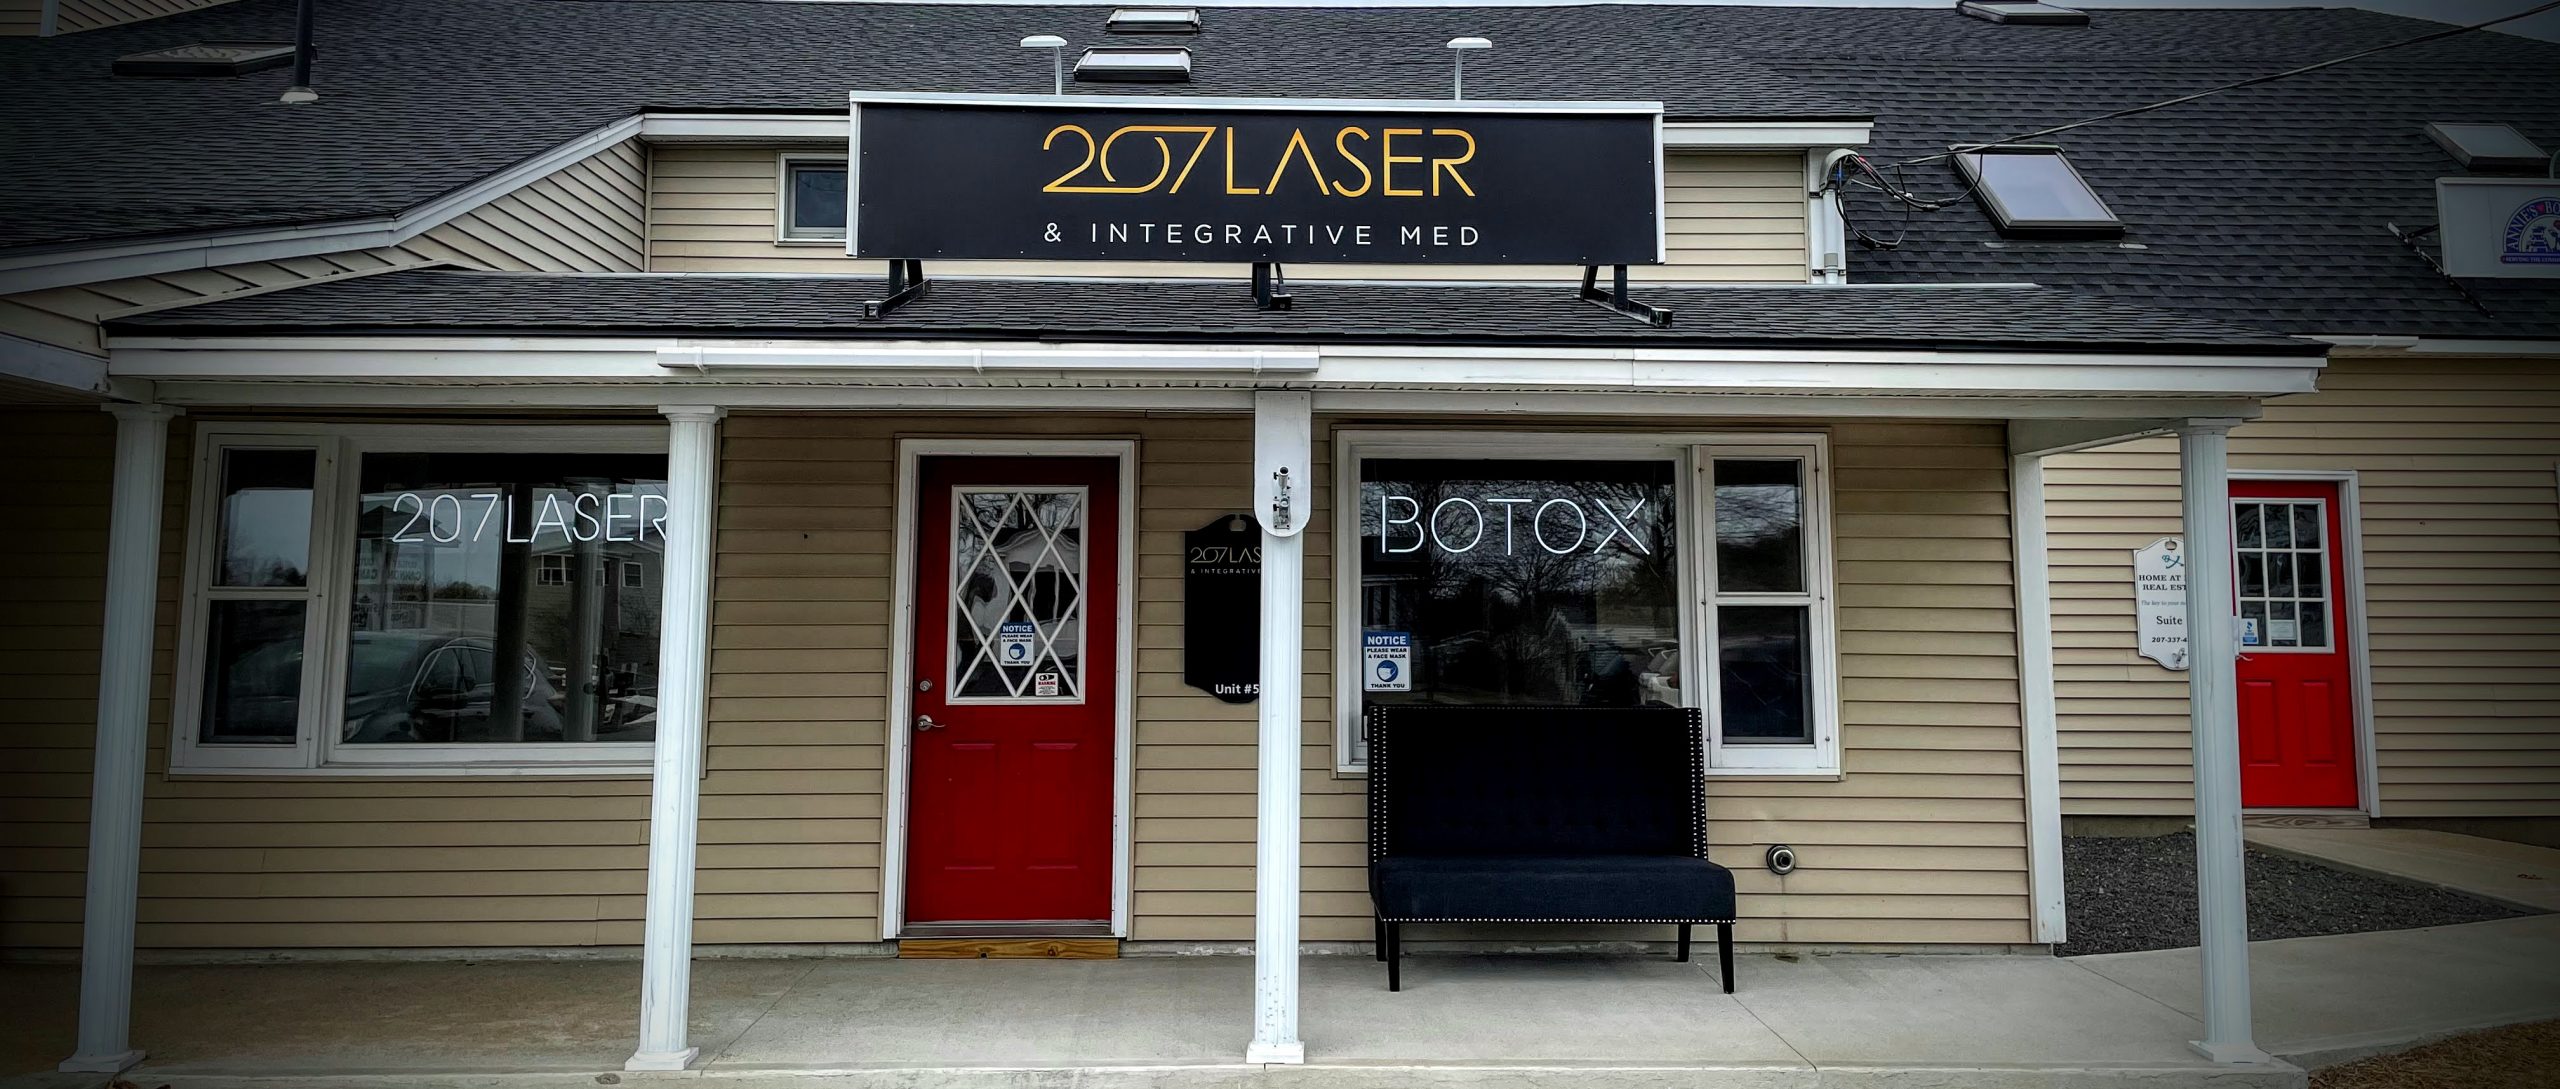 207 laser store front at Post Road wells